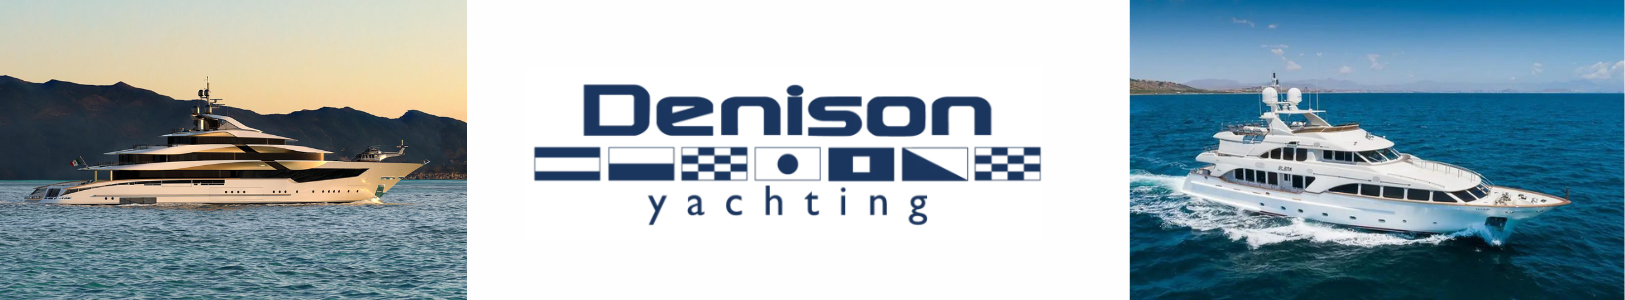 denison-yachting-header.png